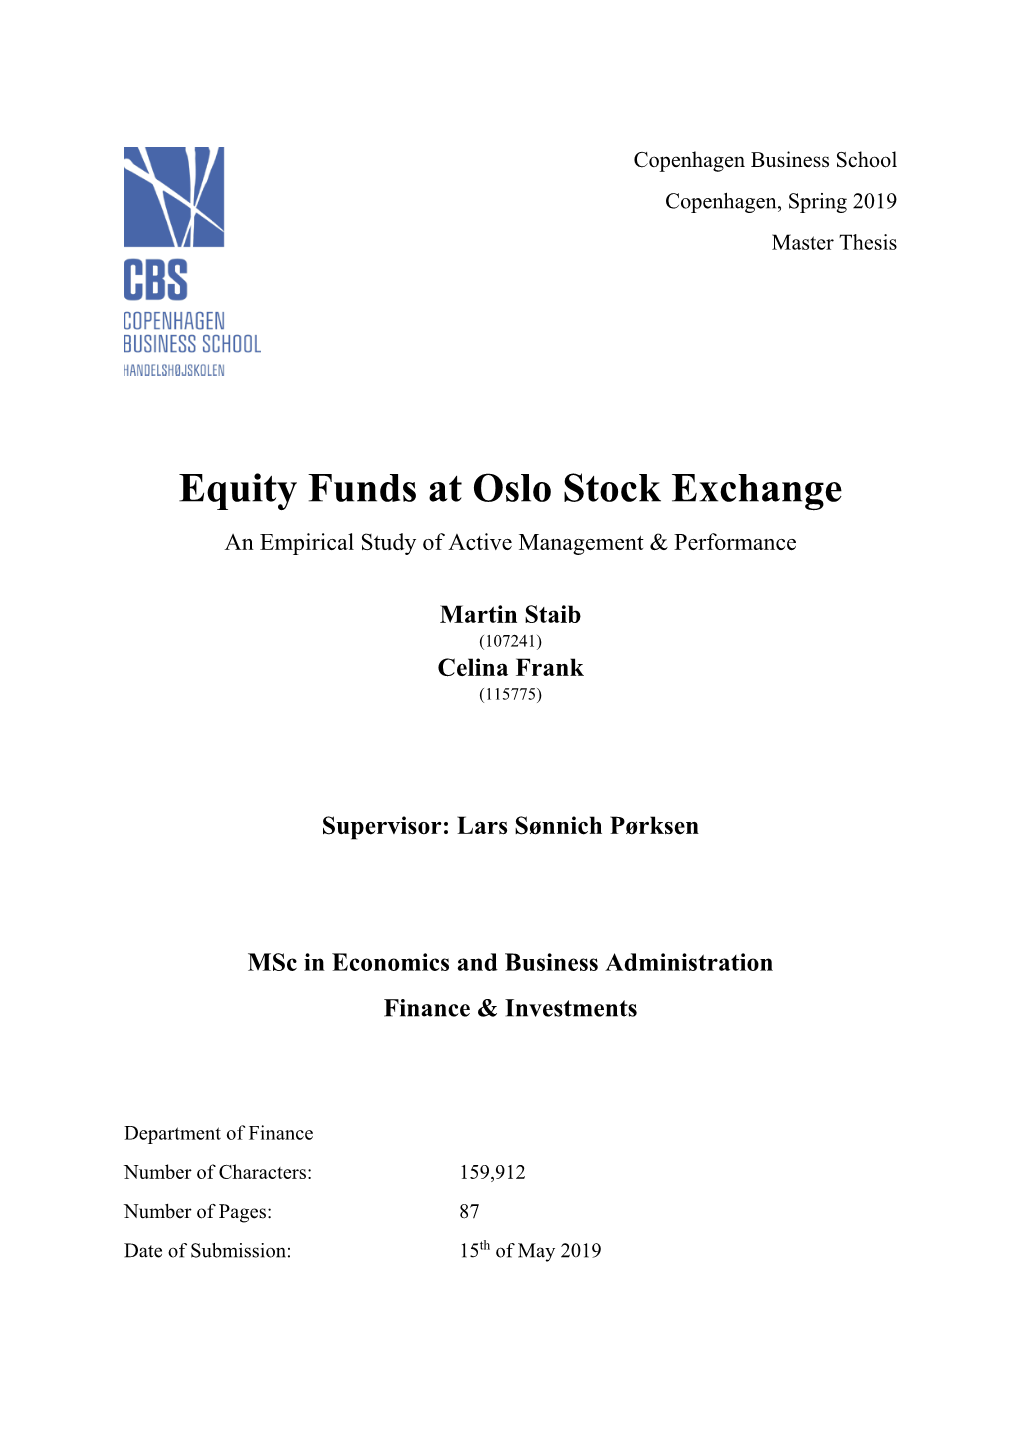 Equity Funds at Oslo Stock Exchange an Empirical Study of Active Management & Performance